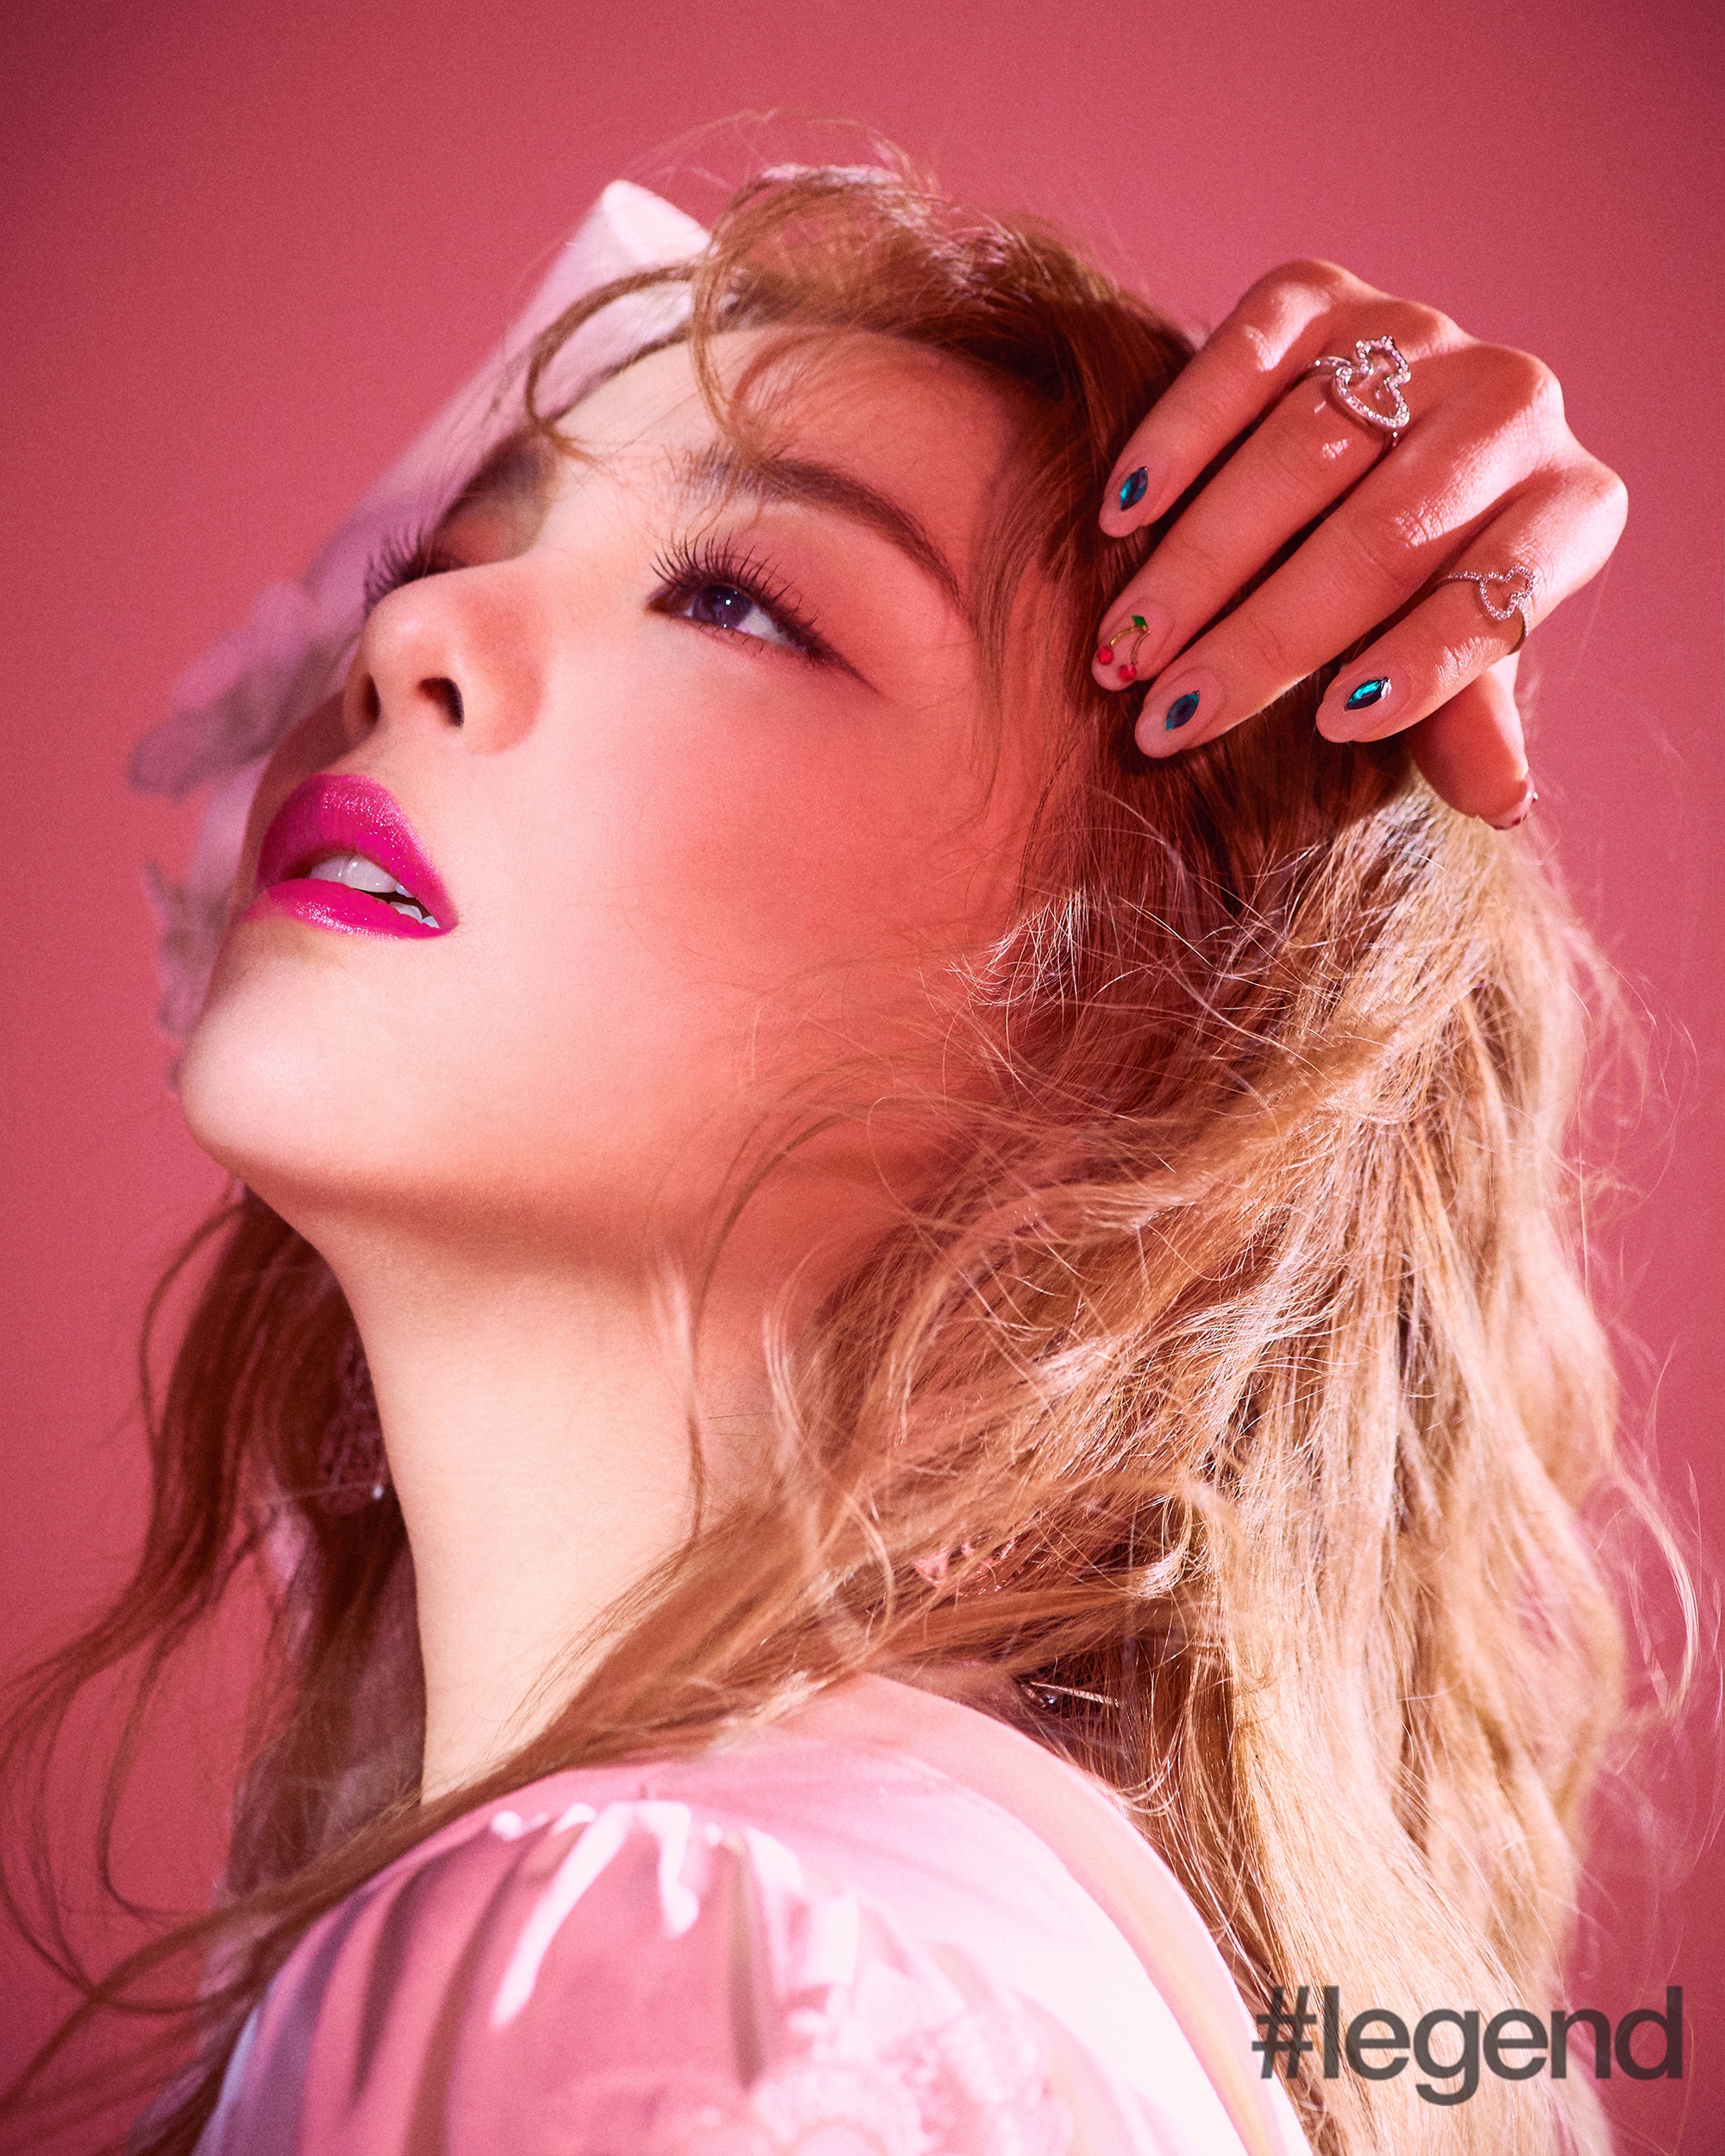 ailee-new-pictorial-legend-magazine-6